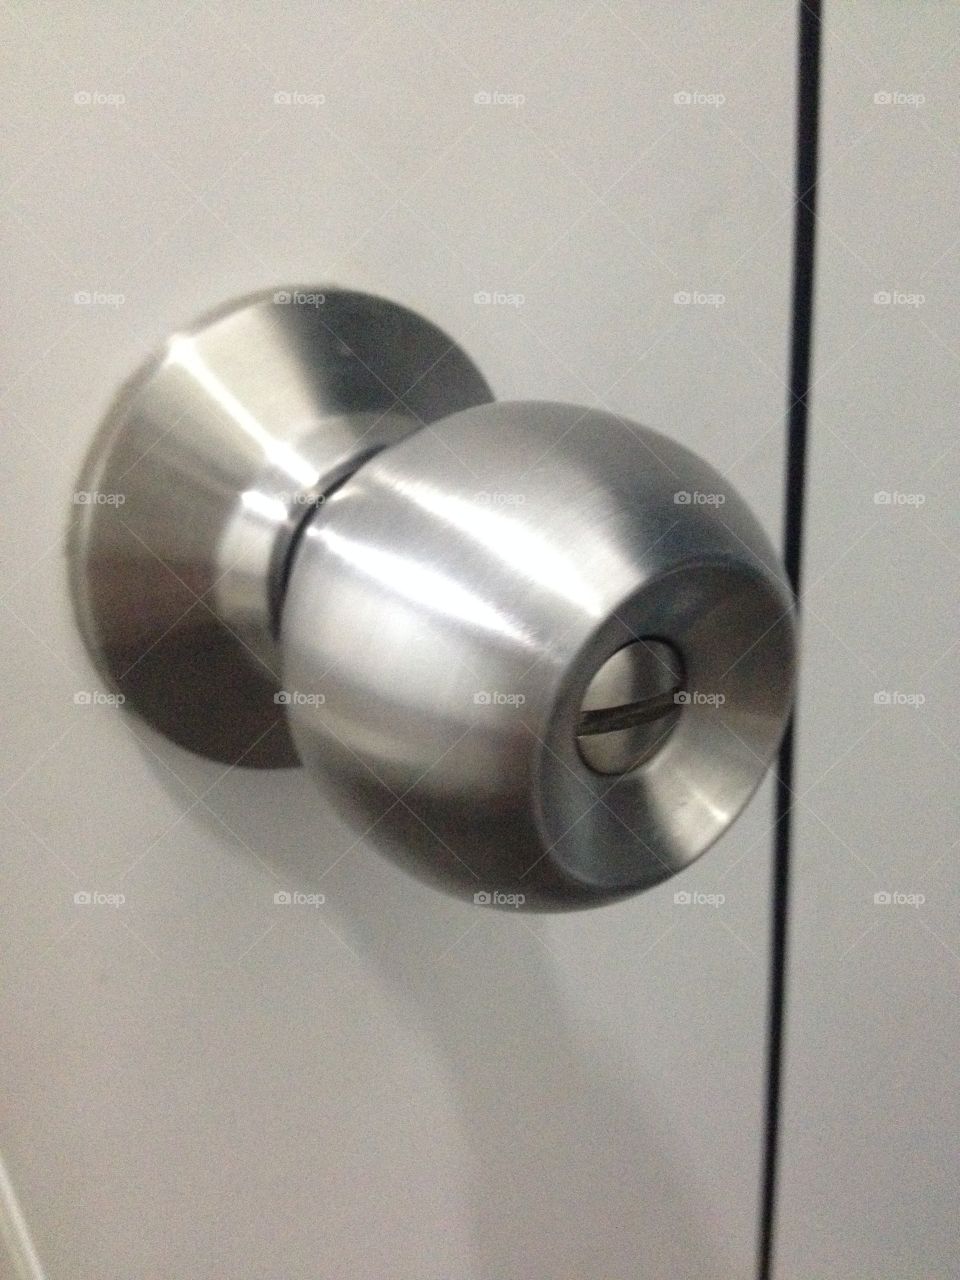 Stainless steel knob and white bath room door.